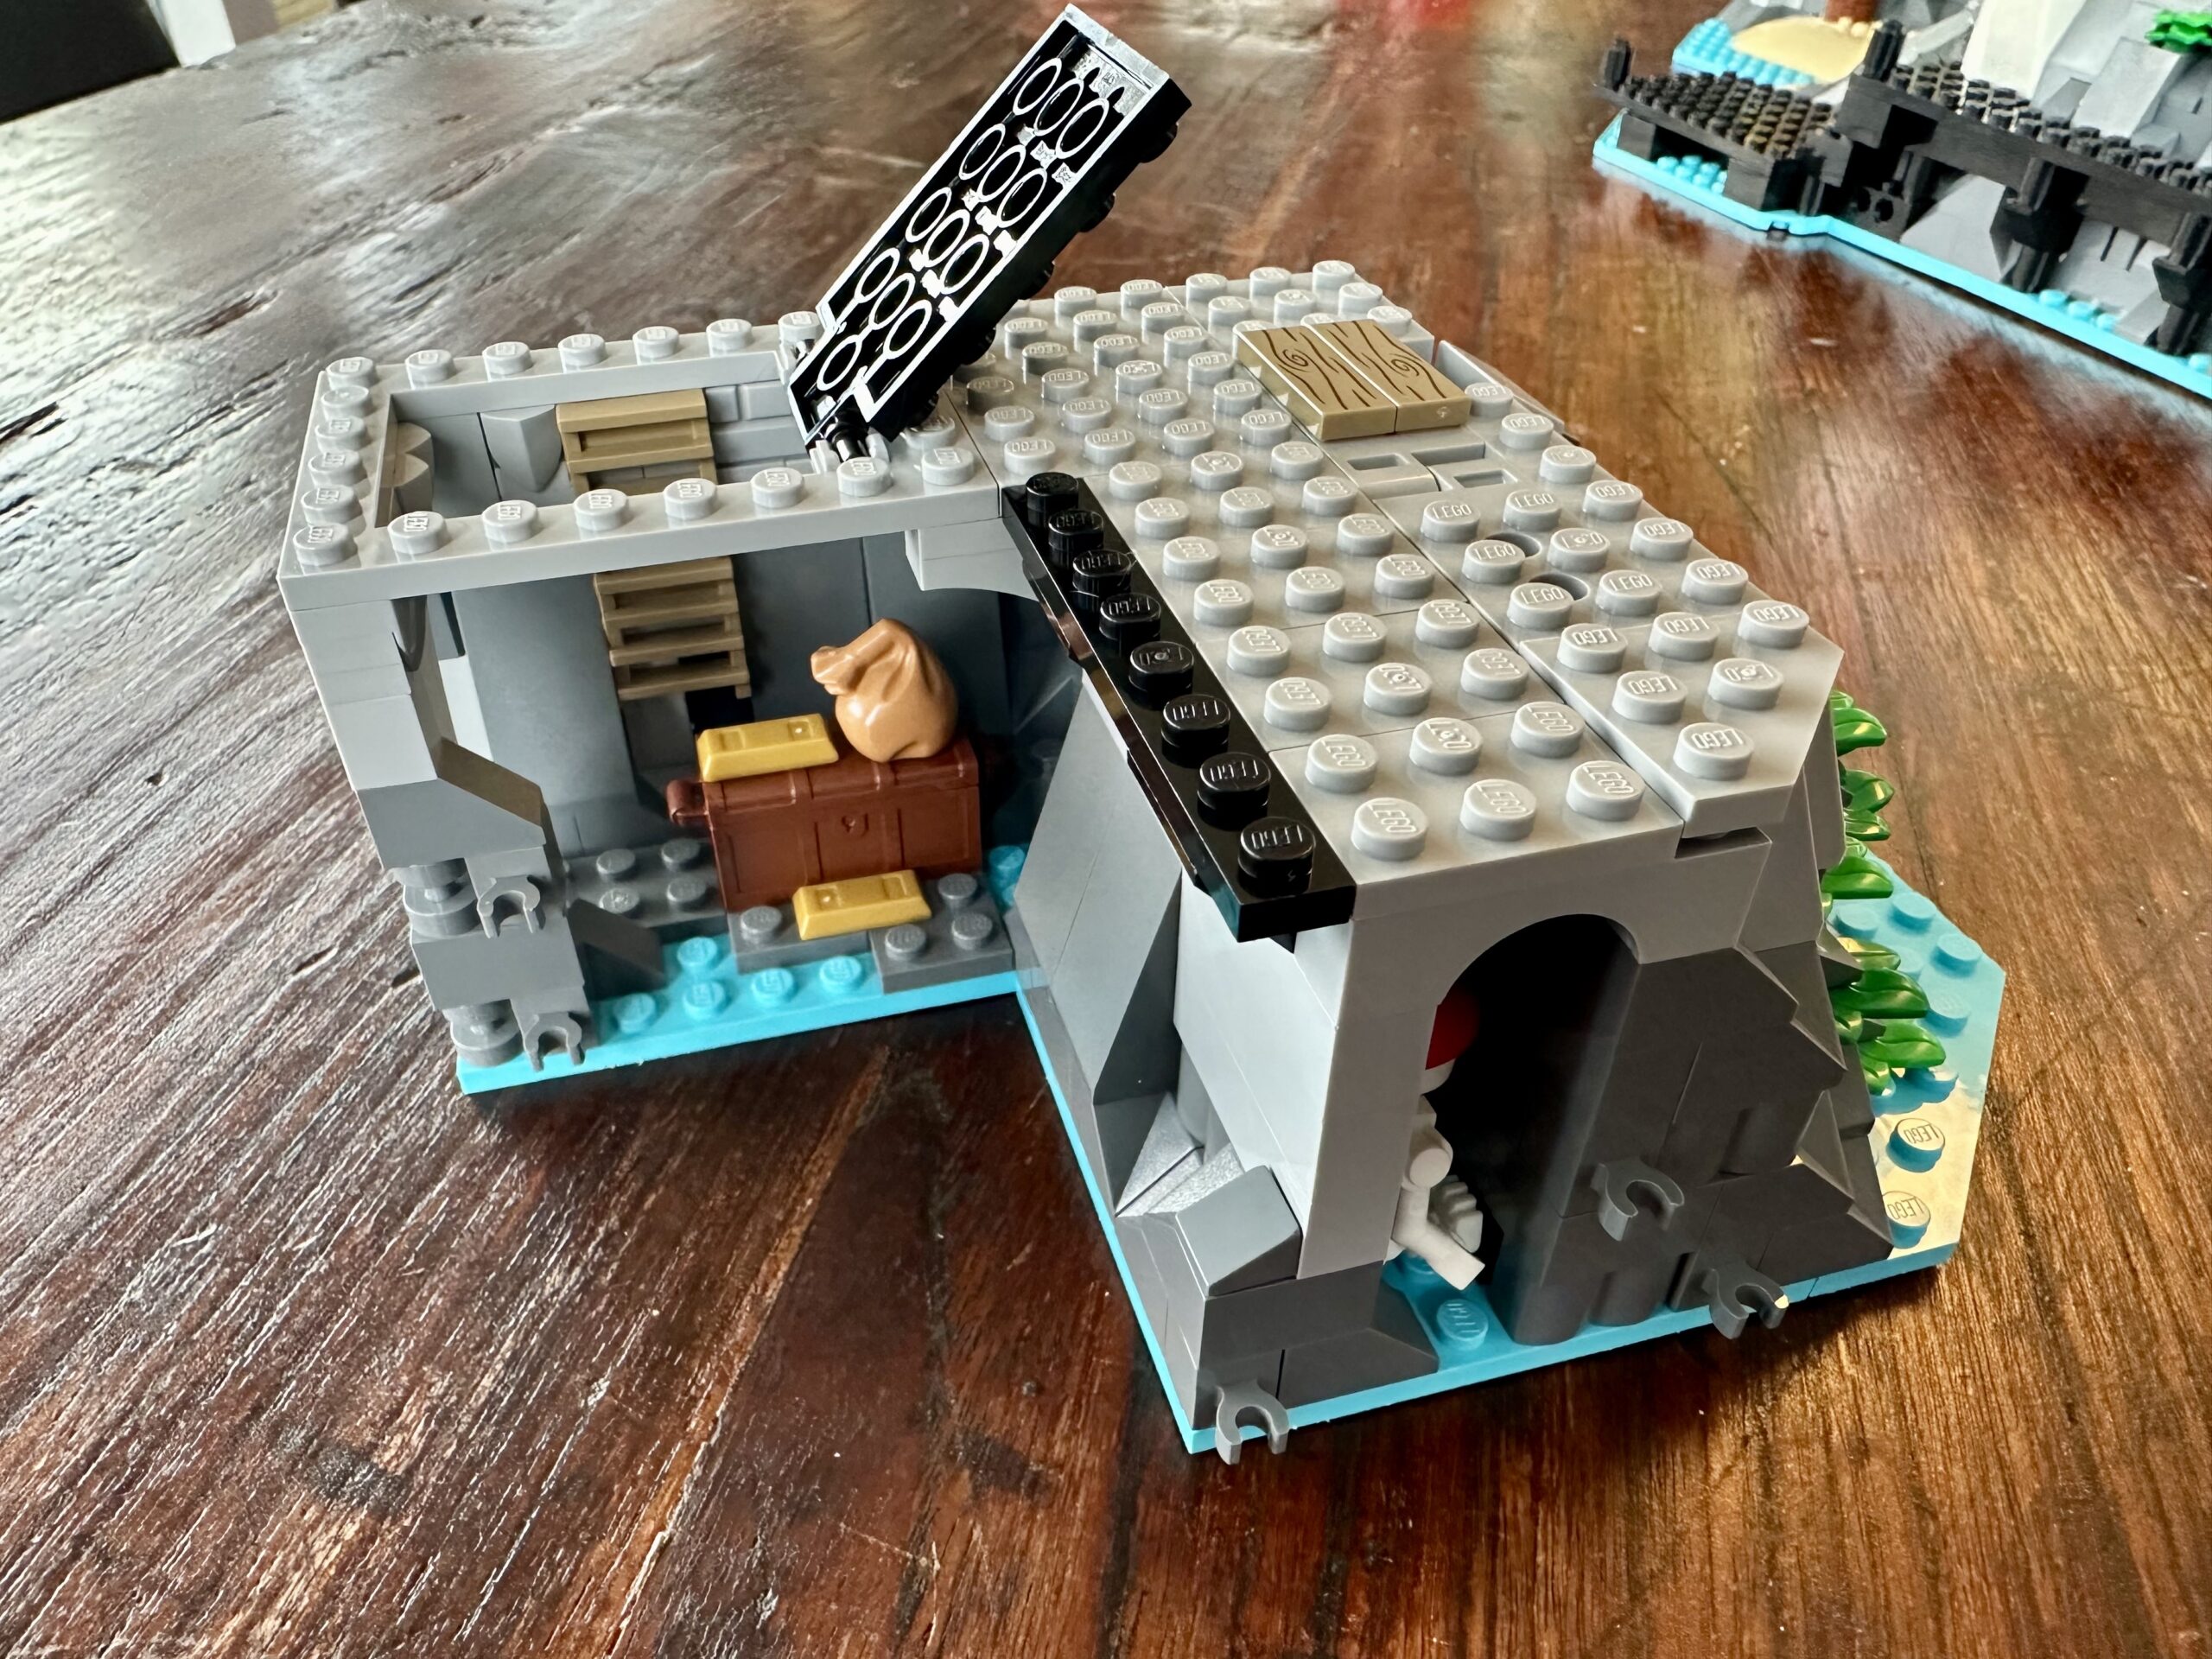 LEGO build of set 10320 Eldorado Fortress in progress. An L-shaped section of gray stone foundations. There's a treasure room with gold ingots accessed by ladder and trap door. To the right a skeleton wearing a red bandana is partially visible, wedged into a narrow crevice in the rocks.